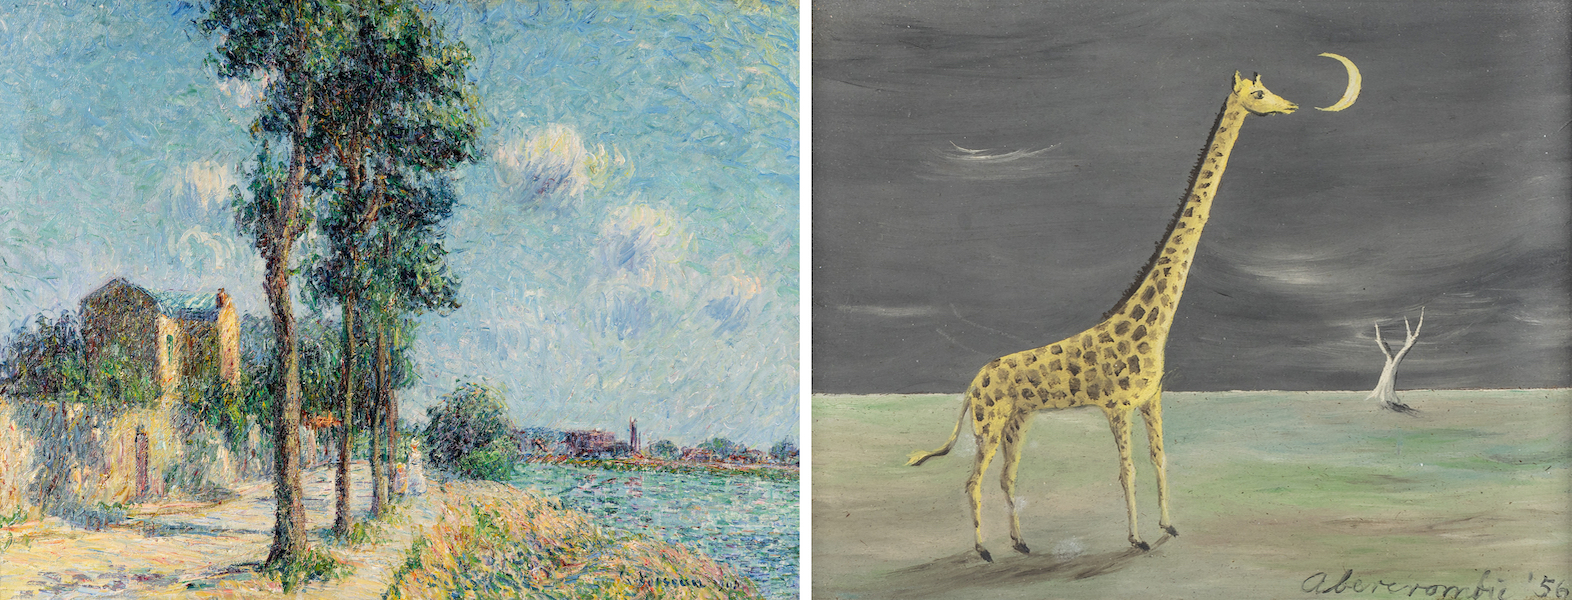 Left, Gustave Loiseau, ‘Le quai du Pothuis a Pontoise,’ $201,600, from the May 18 European Art sale; Right, Gertrude Abercrombie, ‘Giraffe and Moon,’ $182,700, from the May 19 American Art sale. Images courtesy of Hindman